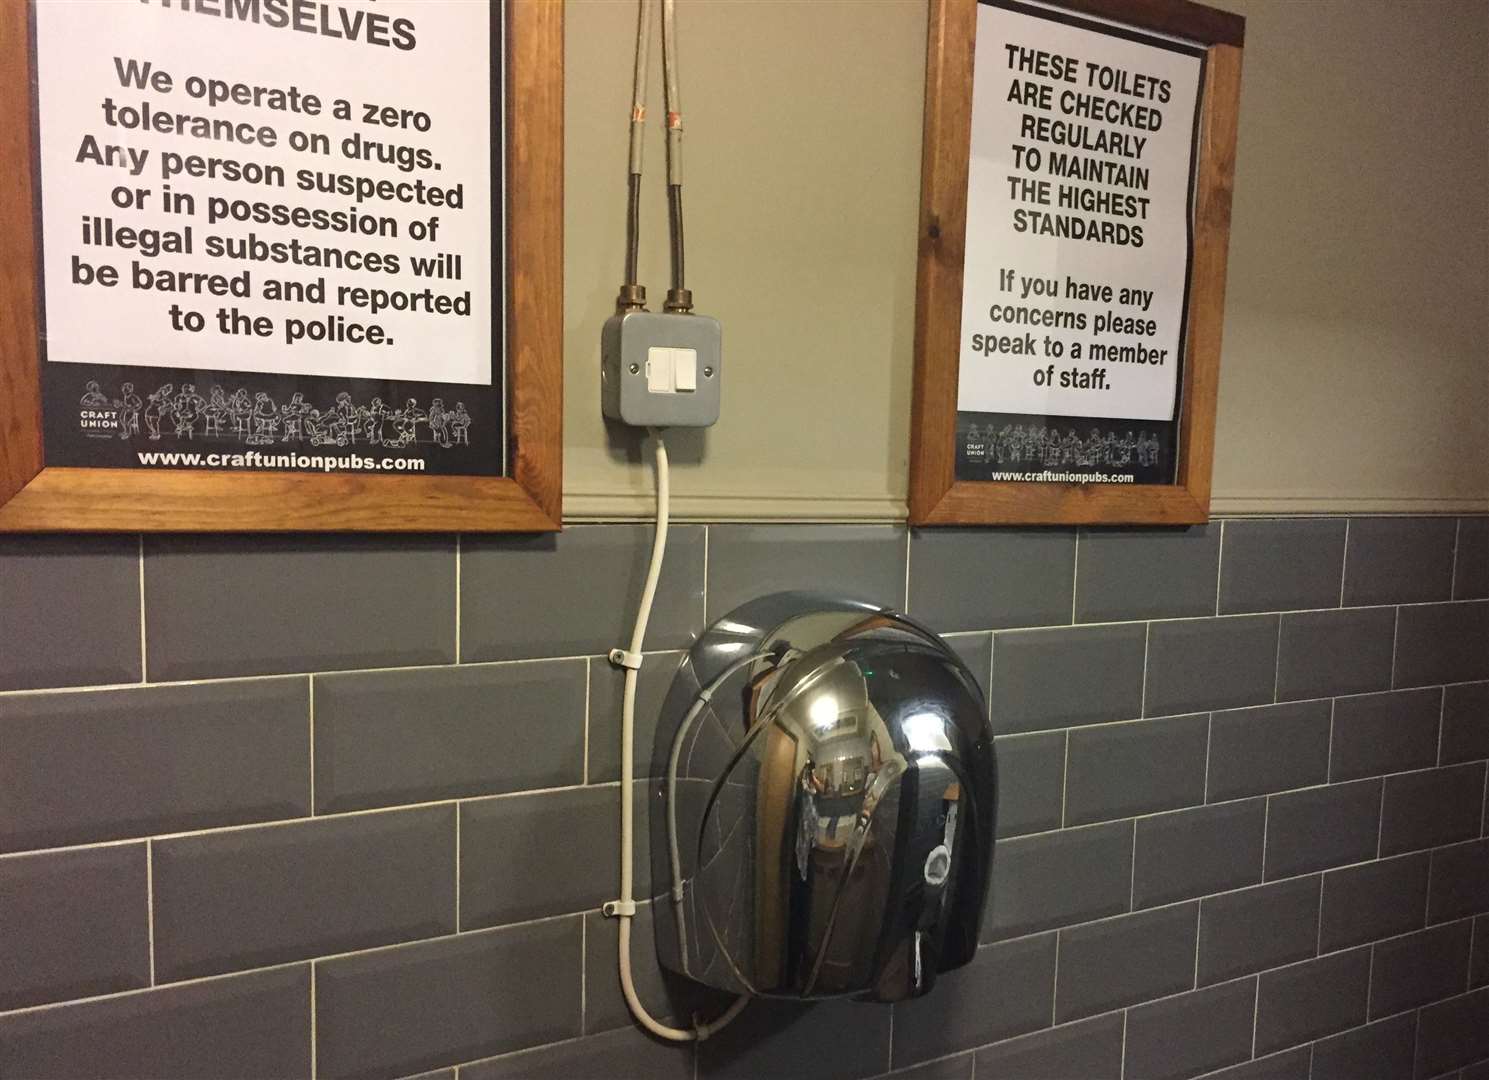 The hand dryer in the ladies is in much better nick than the one in the gents, but the same warning notice about drugs is prominent in both toilets